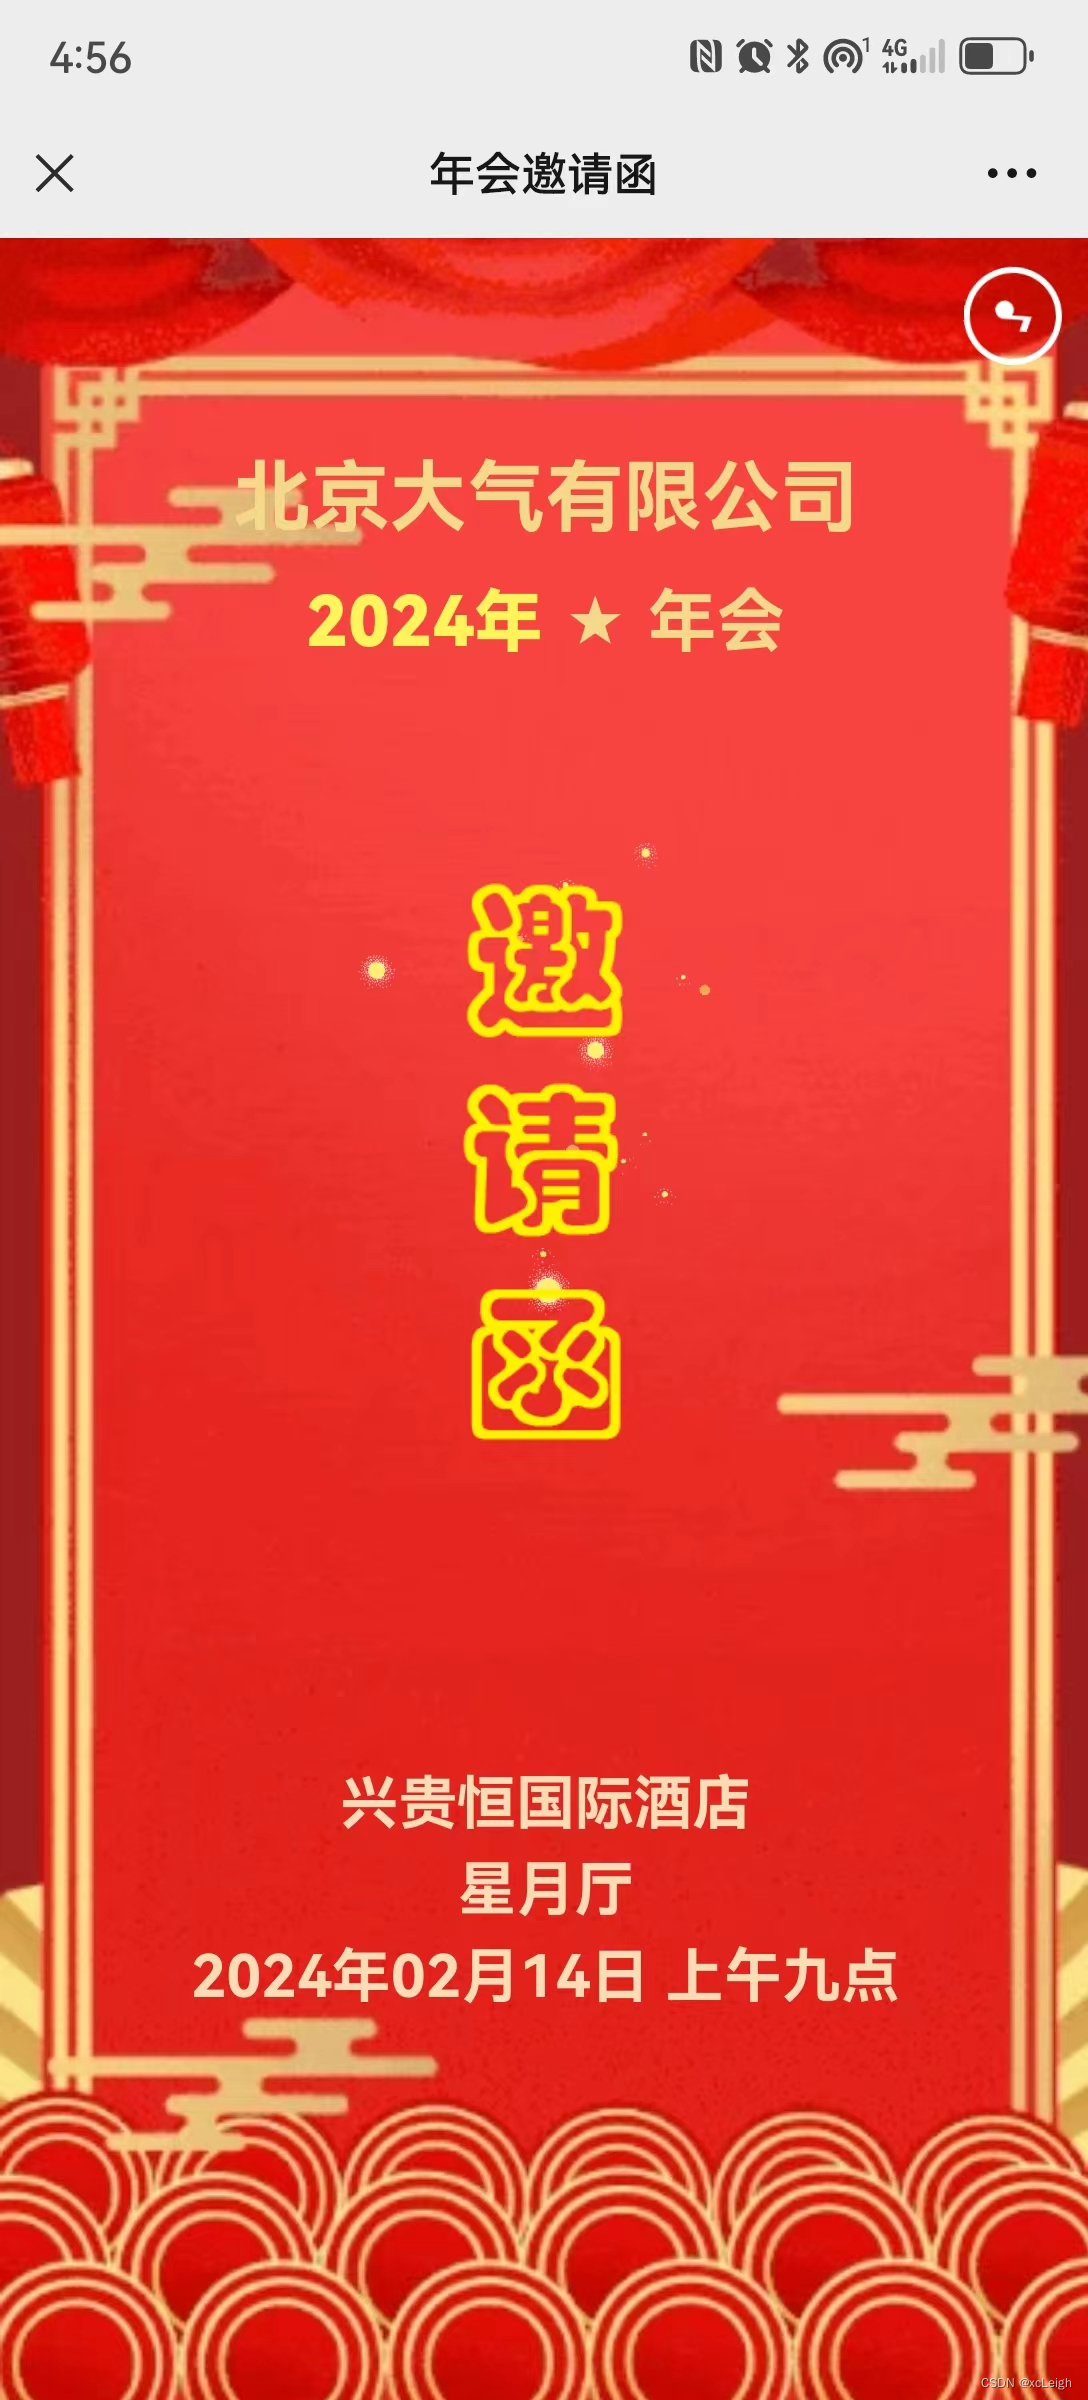 <span style='color:red;'>html</span>5<span style='color:red;'>实现</span><span style='color:red;'>好看</span><span style='color:red;'>的</span>年会邀请函源码<span style='color:red;'>模板</span>